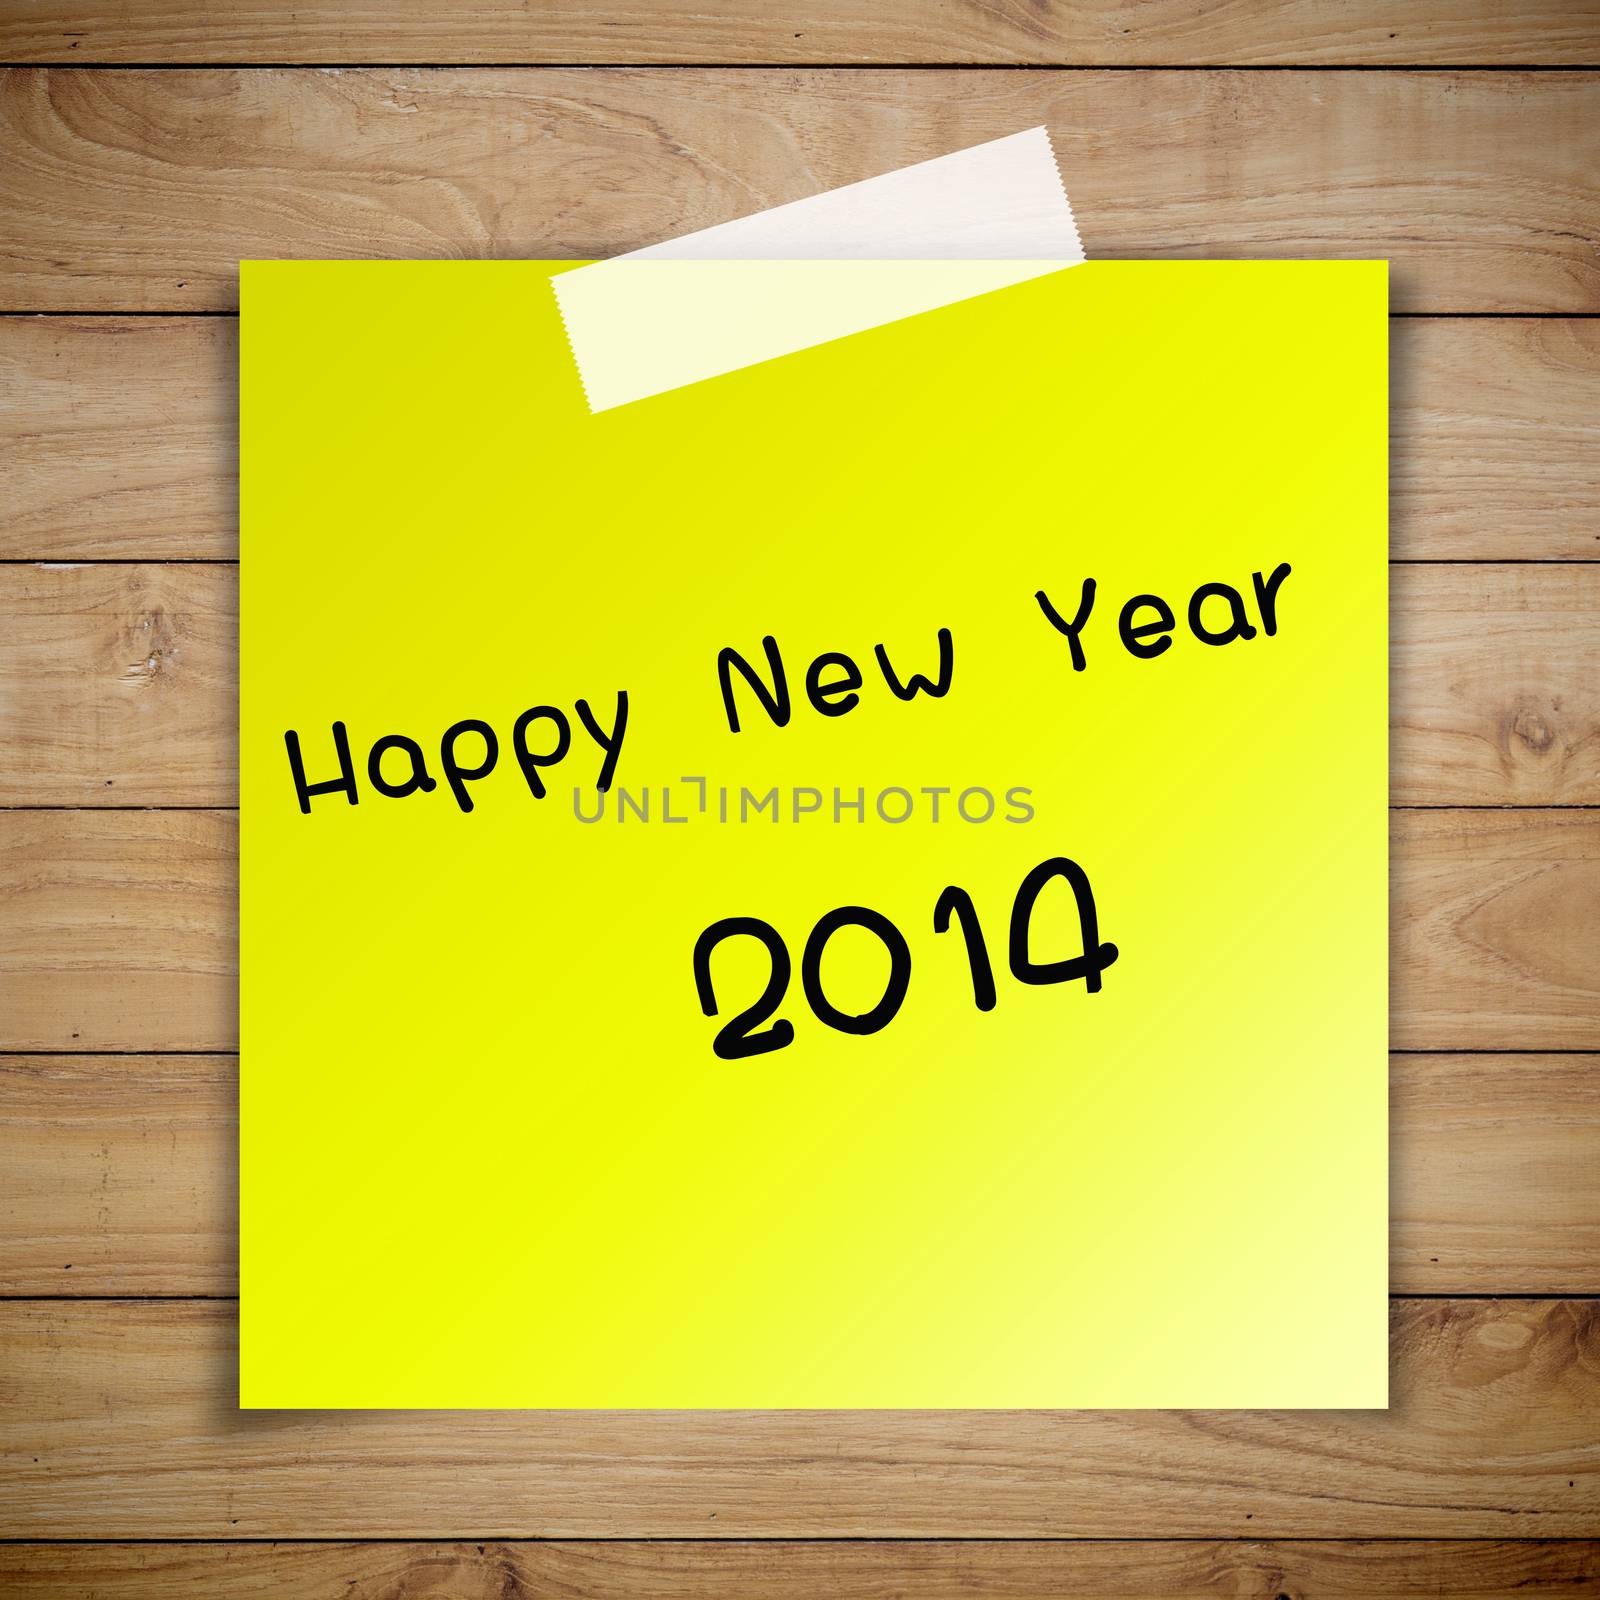 Happy New Year 2014 on sticky paper on Brown wood plank wall texture background